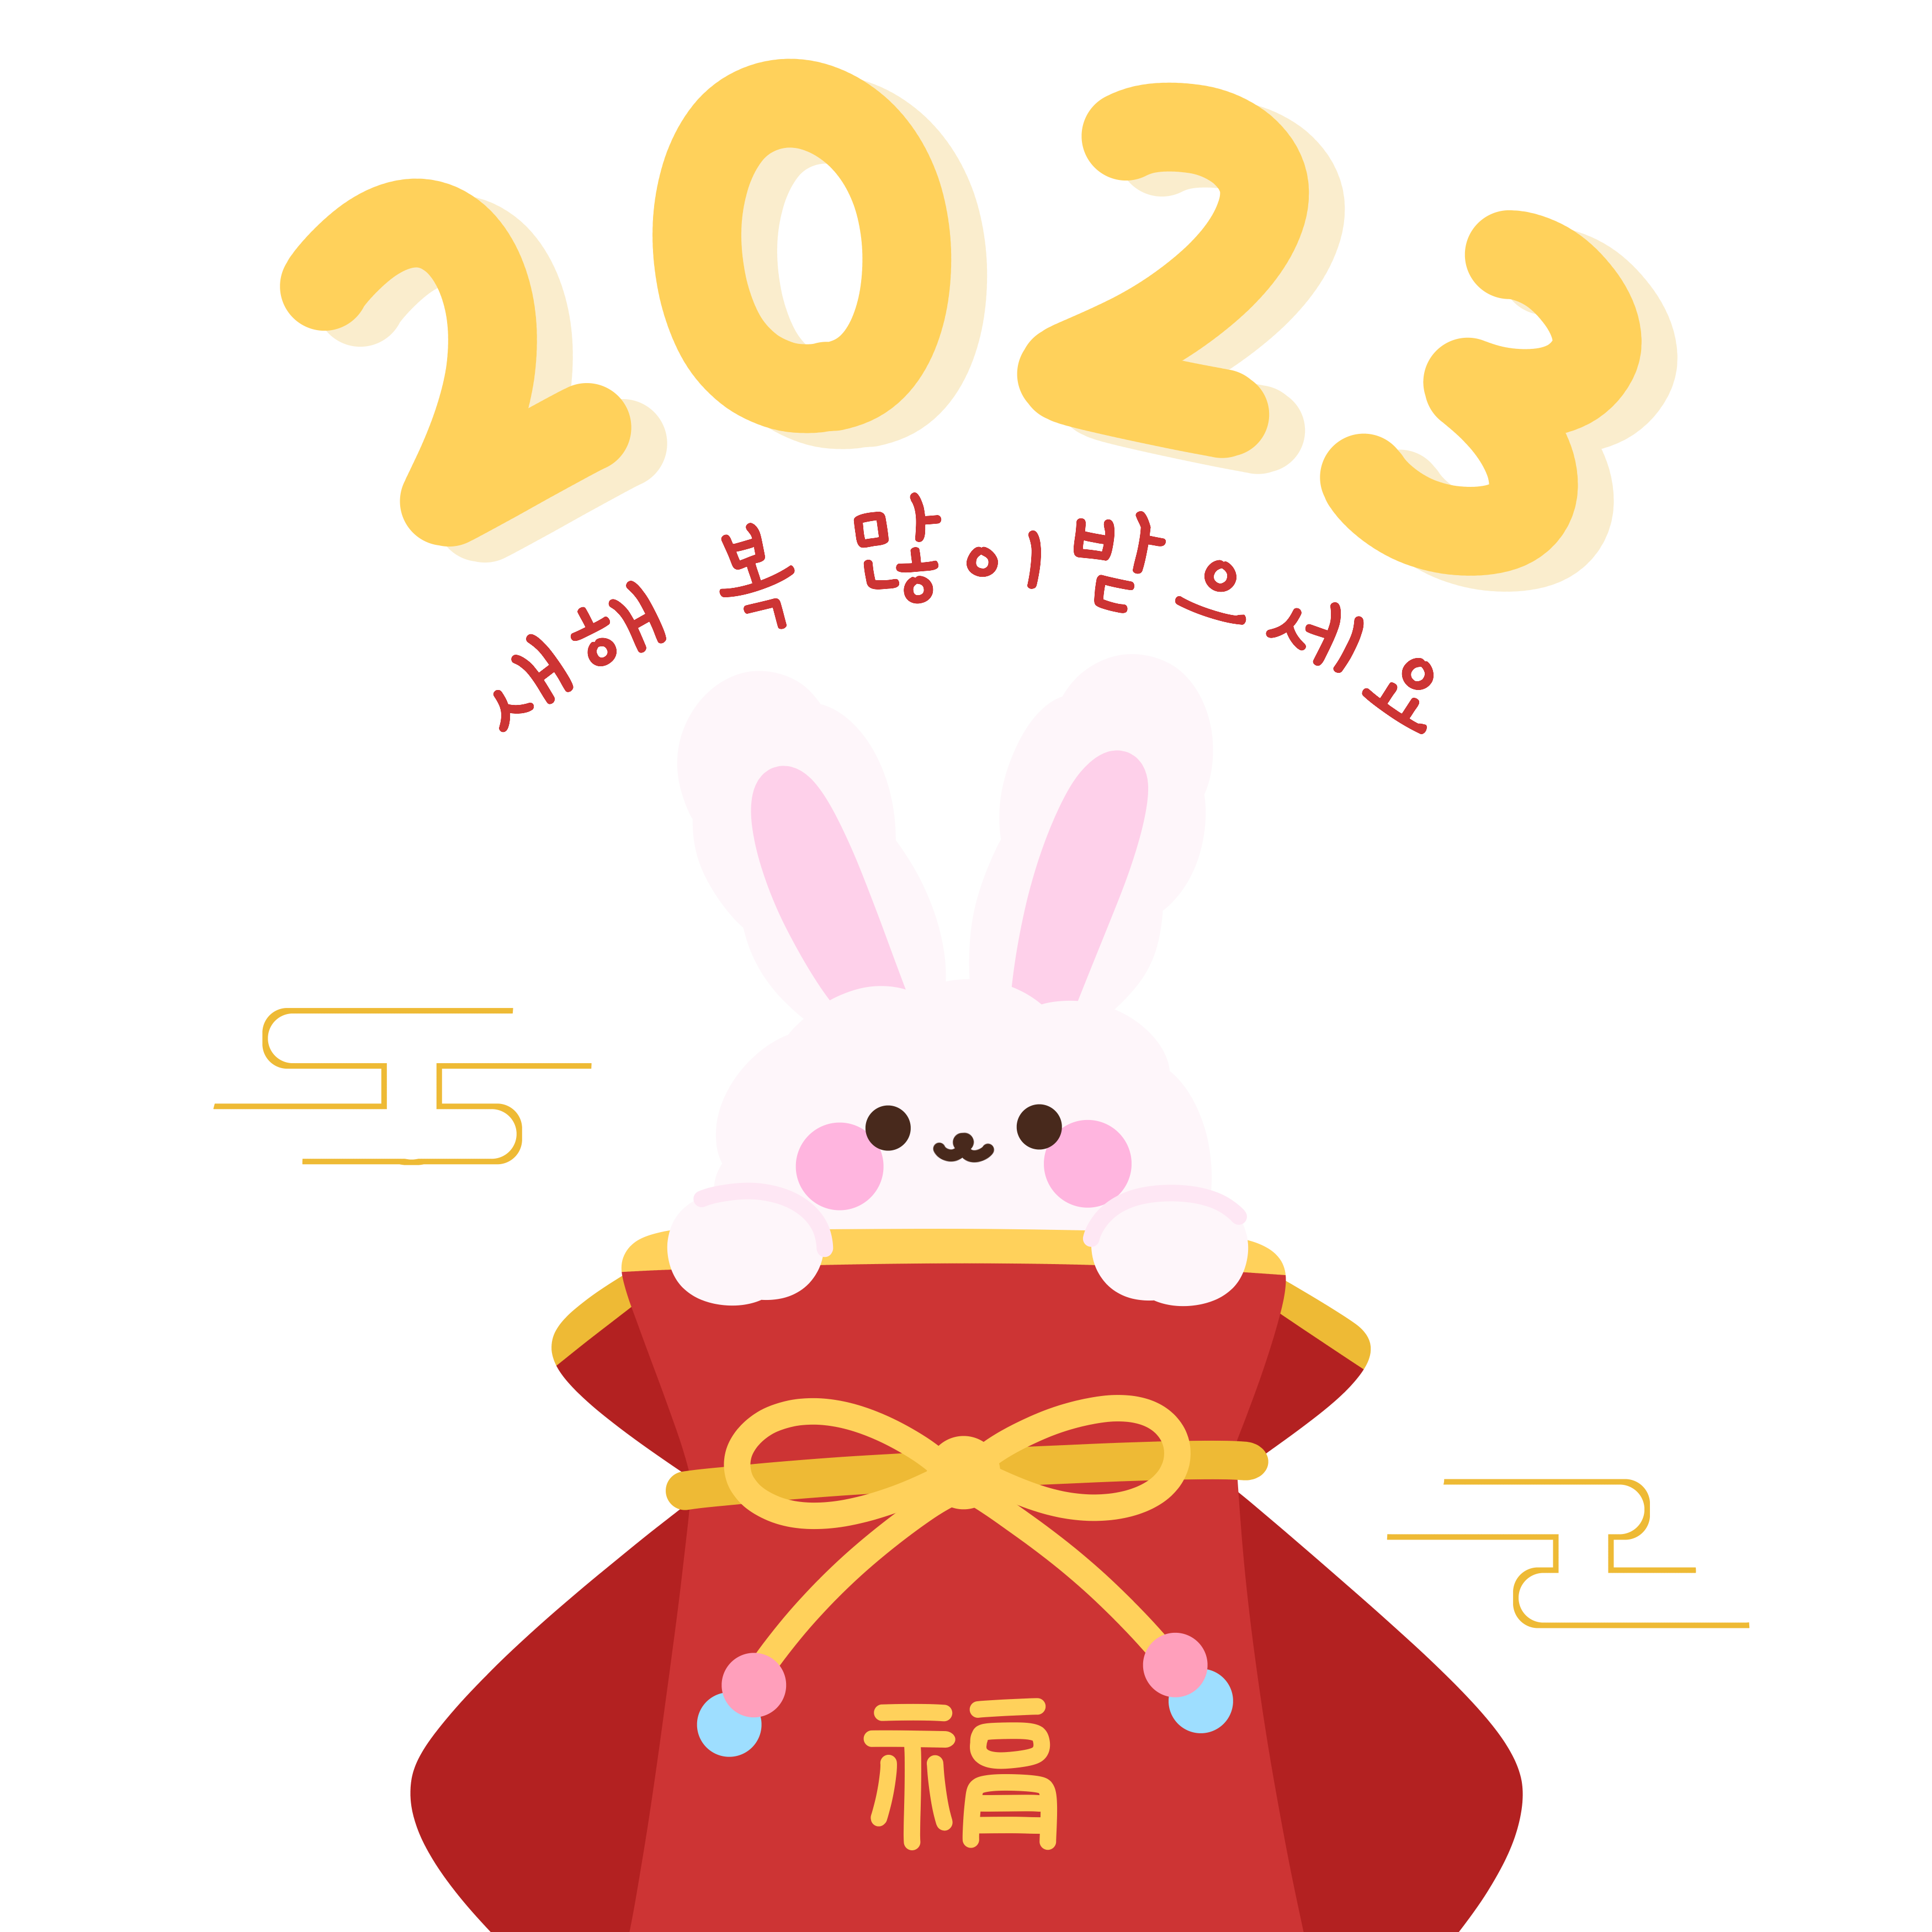 —Pngtree—2023 korean happy new year_8919203.png